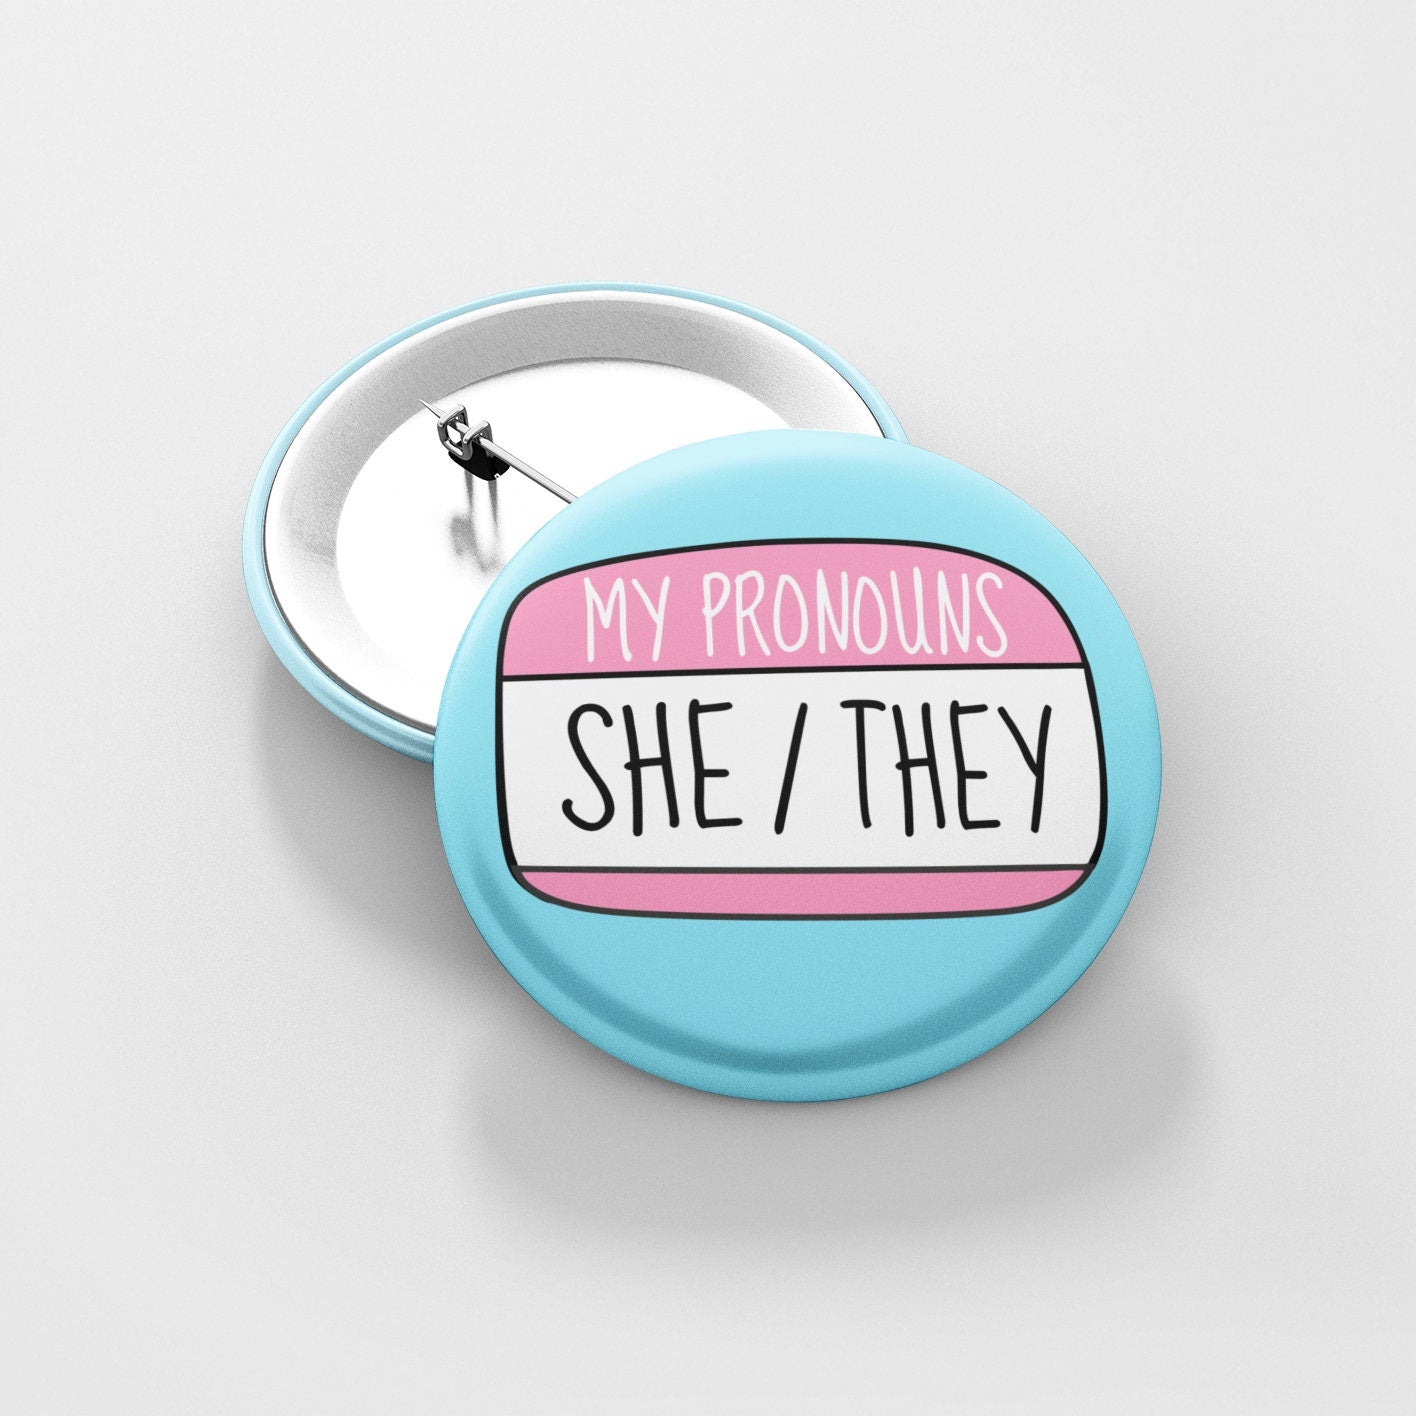 My Pronouns She Her, She They Badge Pin | MULTIPLE CHOICES | she hers - pronoun badge  - Gender Badgs